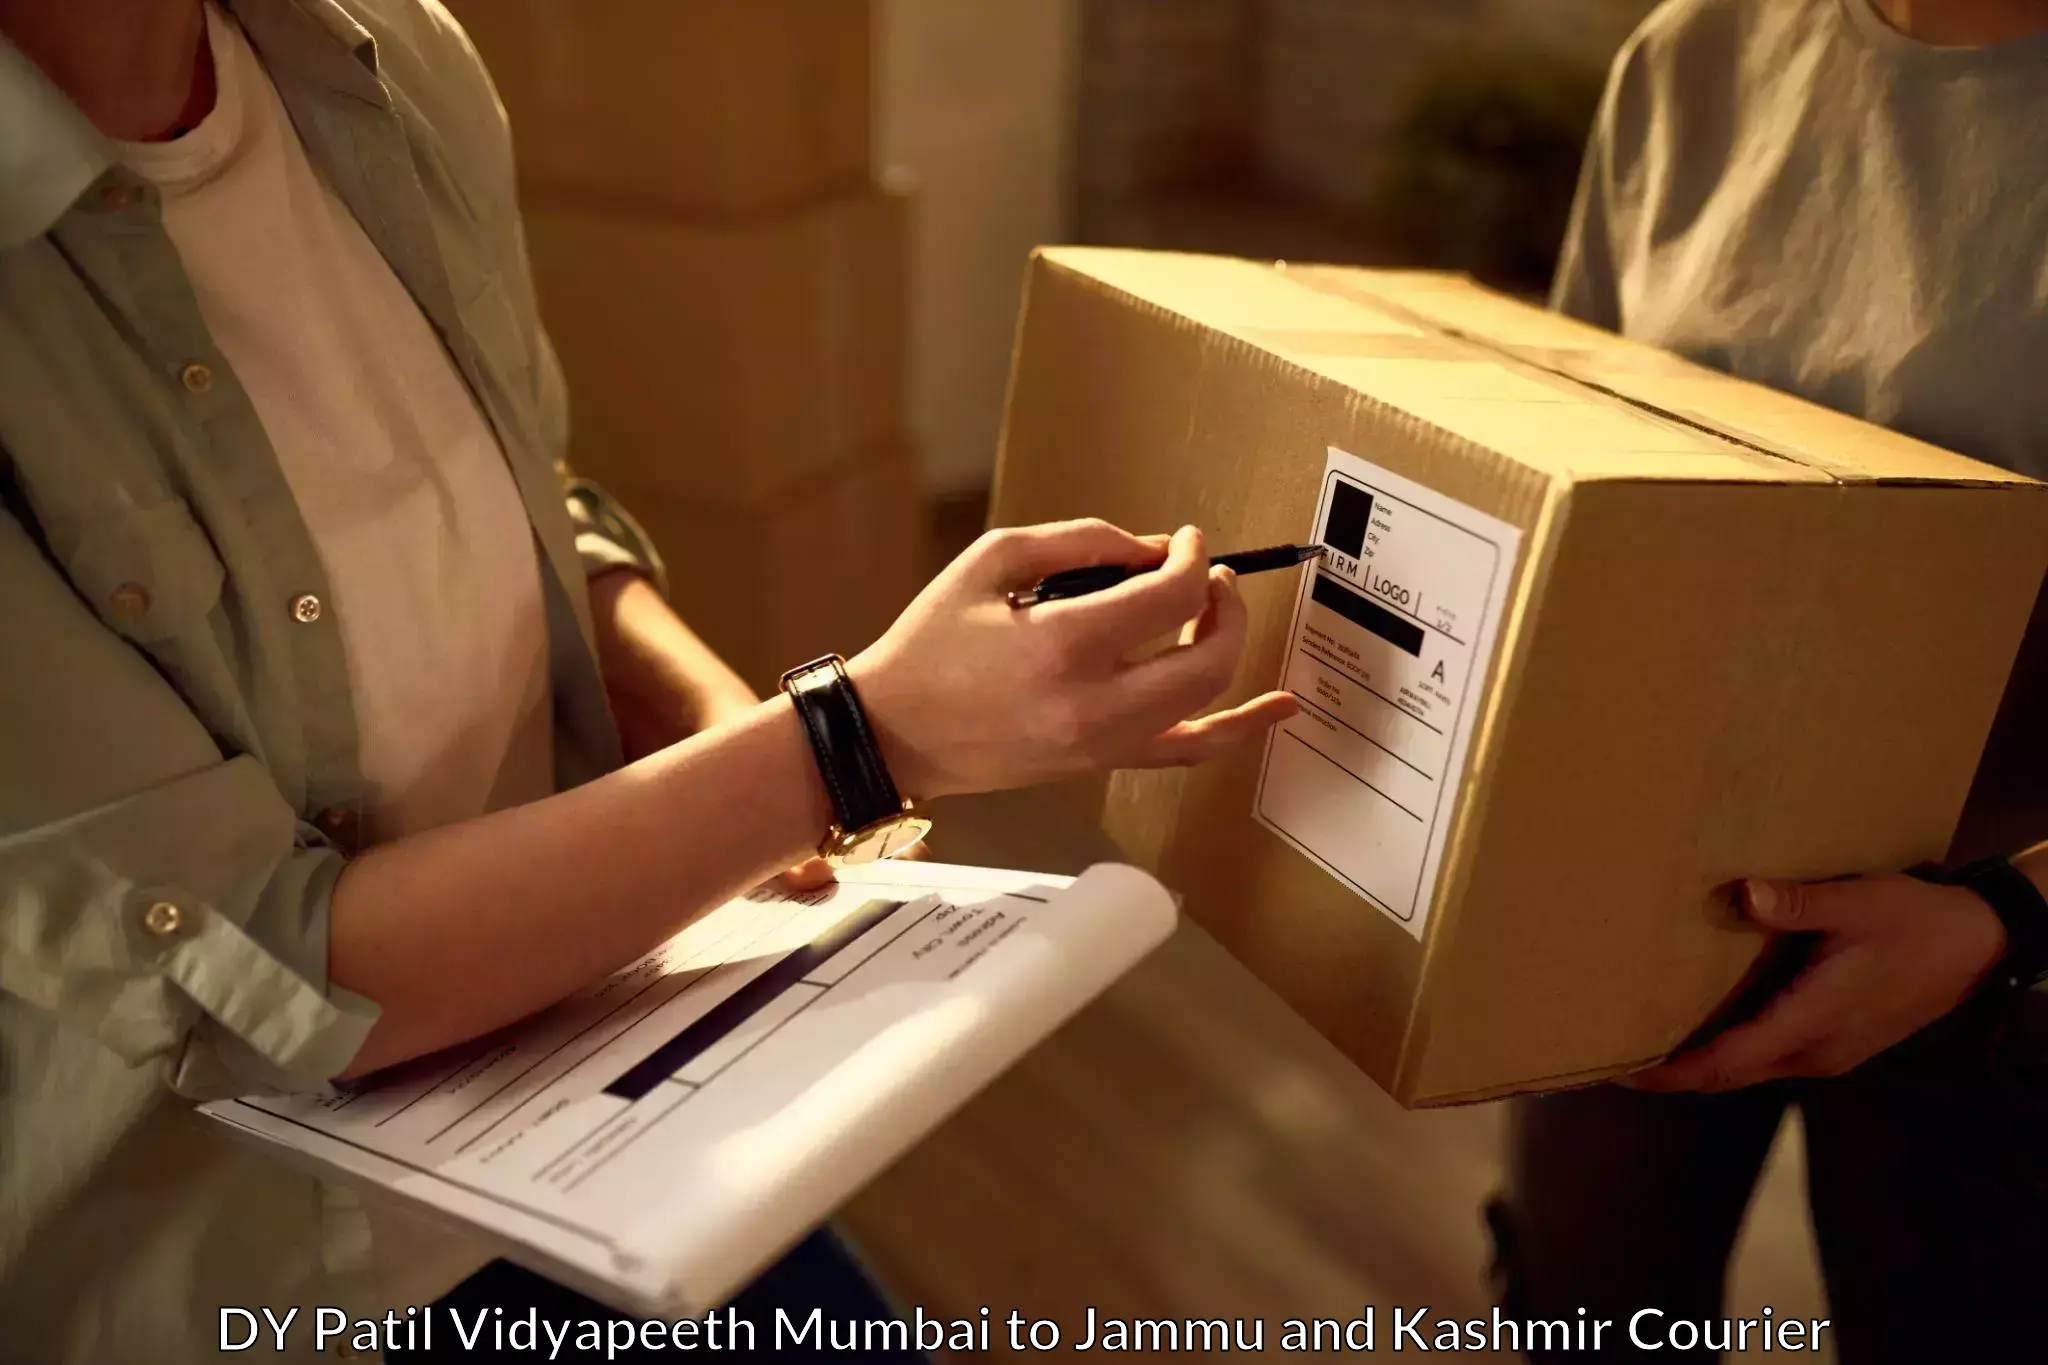 Nationwide parcel services DY Patil Vidyapeeth Mumbai to Udhampur